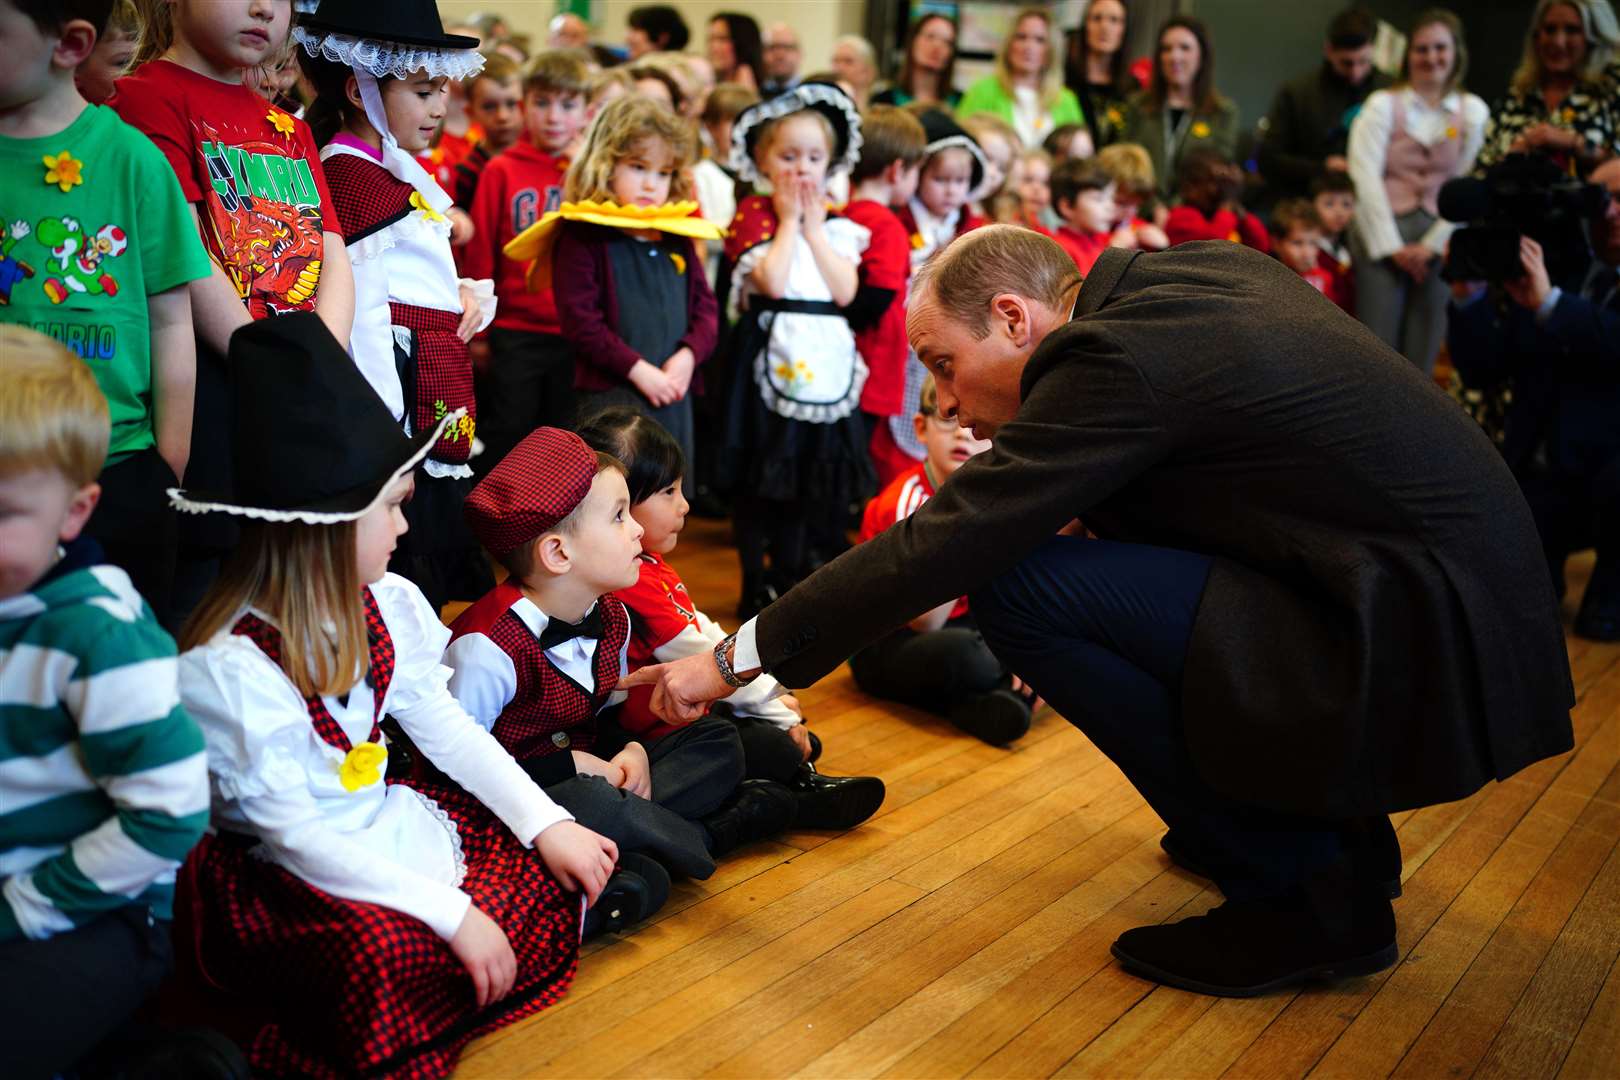 William spent time chatting to the pupils during his visit (Ben Birchall/PA)